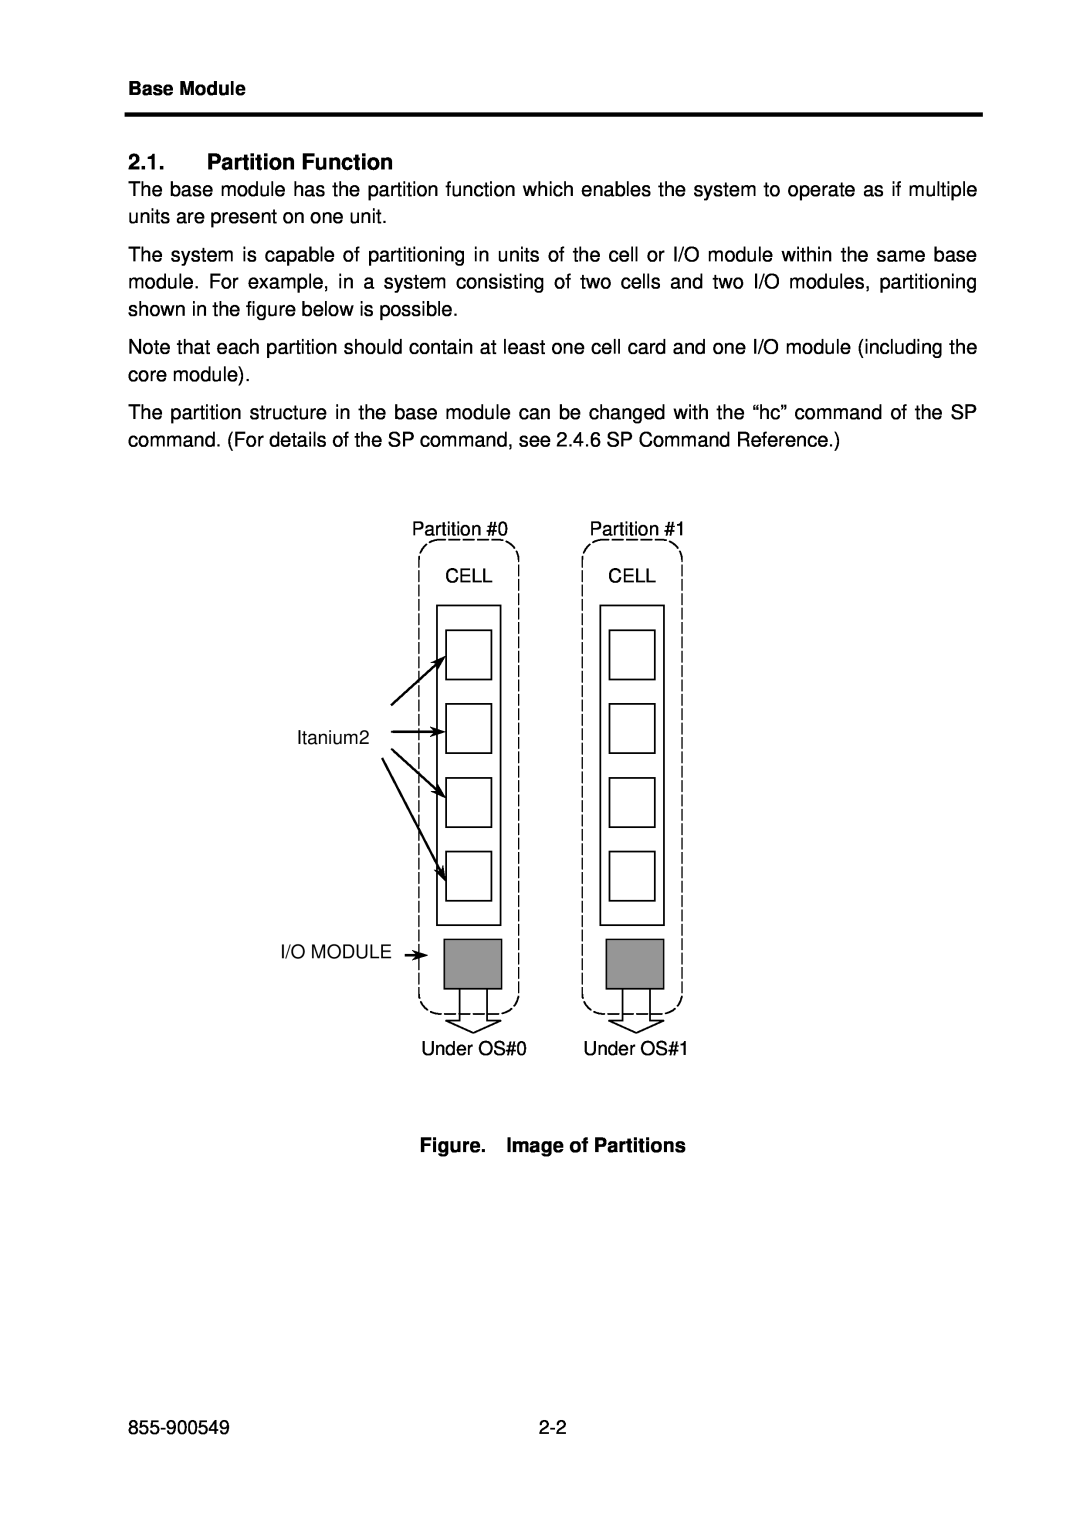 NEC NX7700i, 5020M-16 operation manual Partition Function, Figure. Image of Partitions 